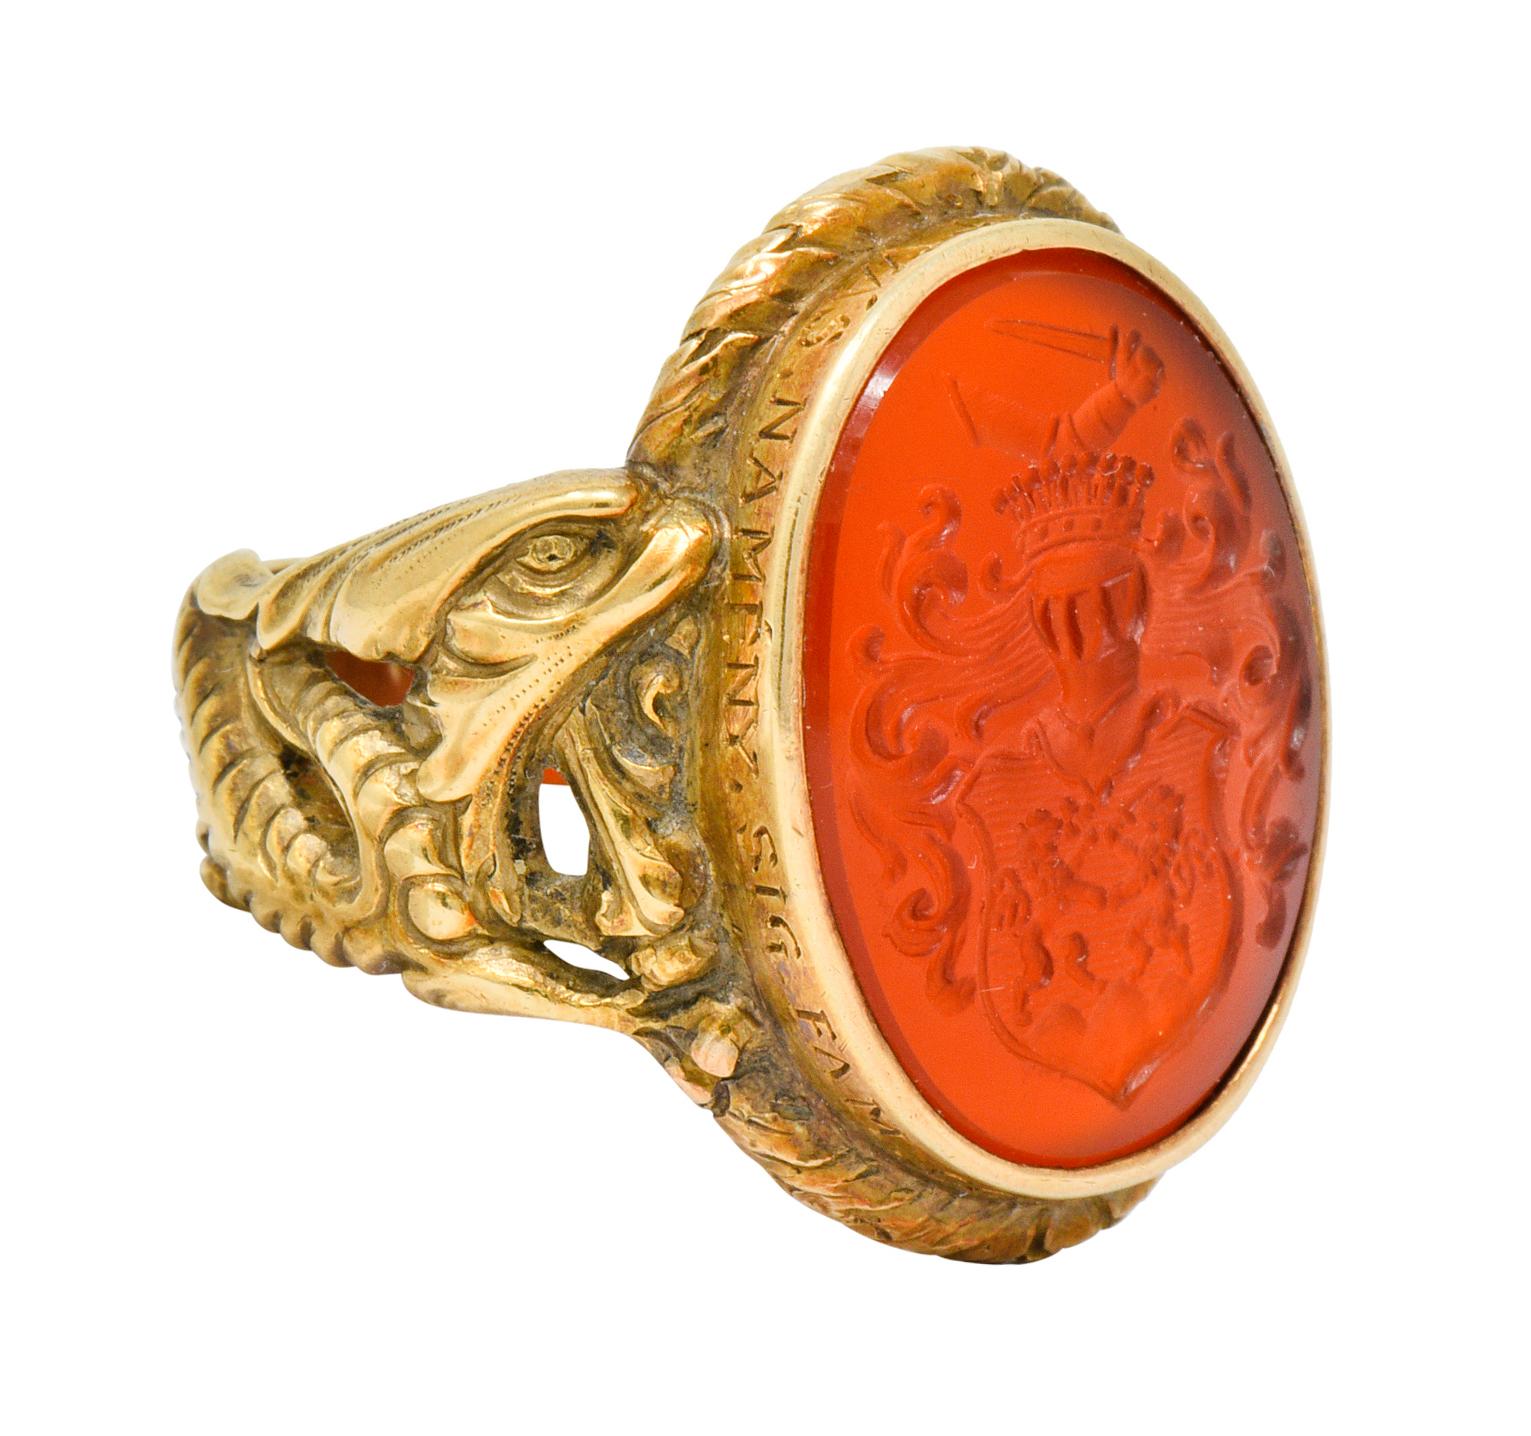 Centering an oval carnelian intaglio, translucent rust red in color, set in a deeply inscribed bezel

Depicts a crowned knight and shield that is emblazoned by two dueling lions with swirled foliate; all topped by a flexed arm grasping a